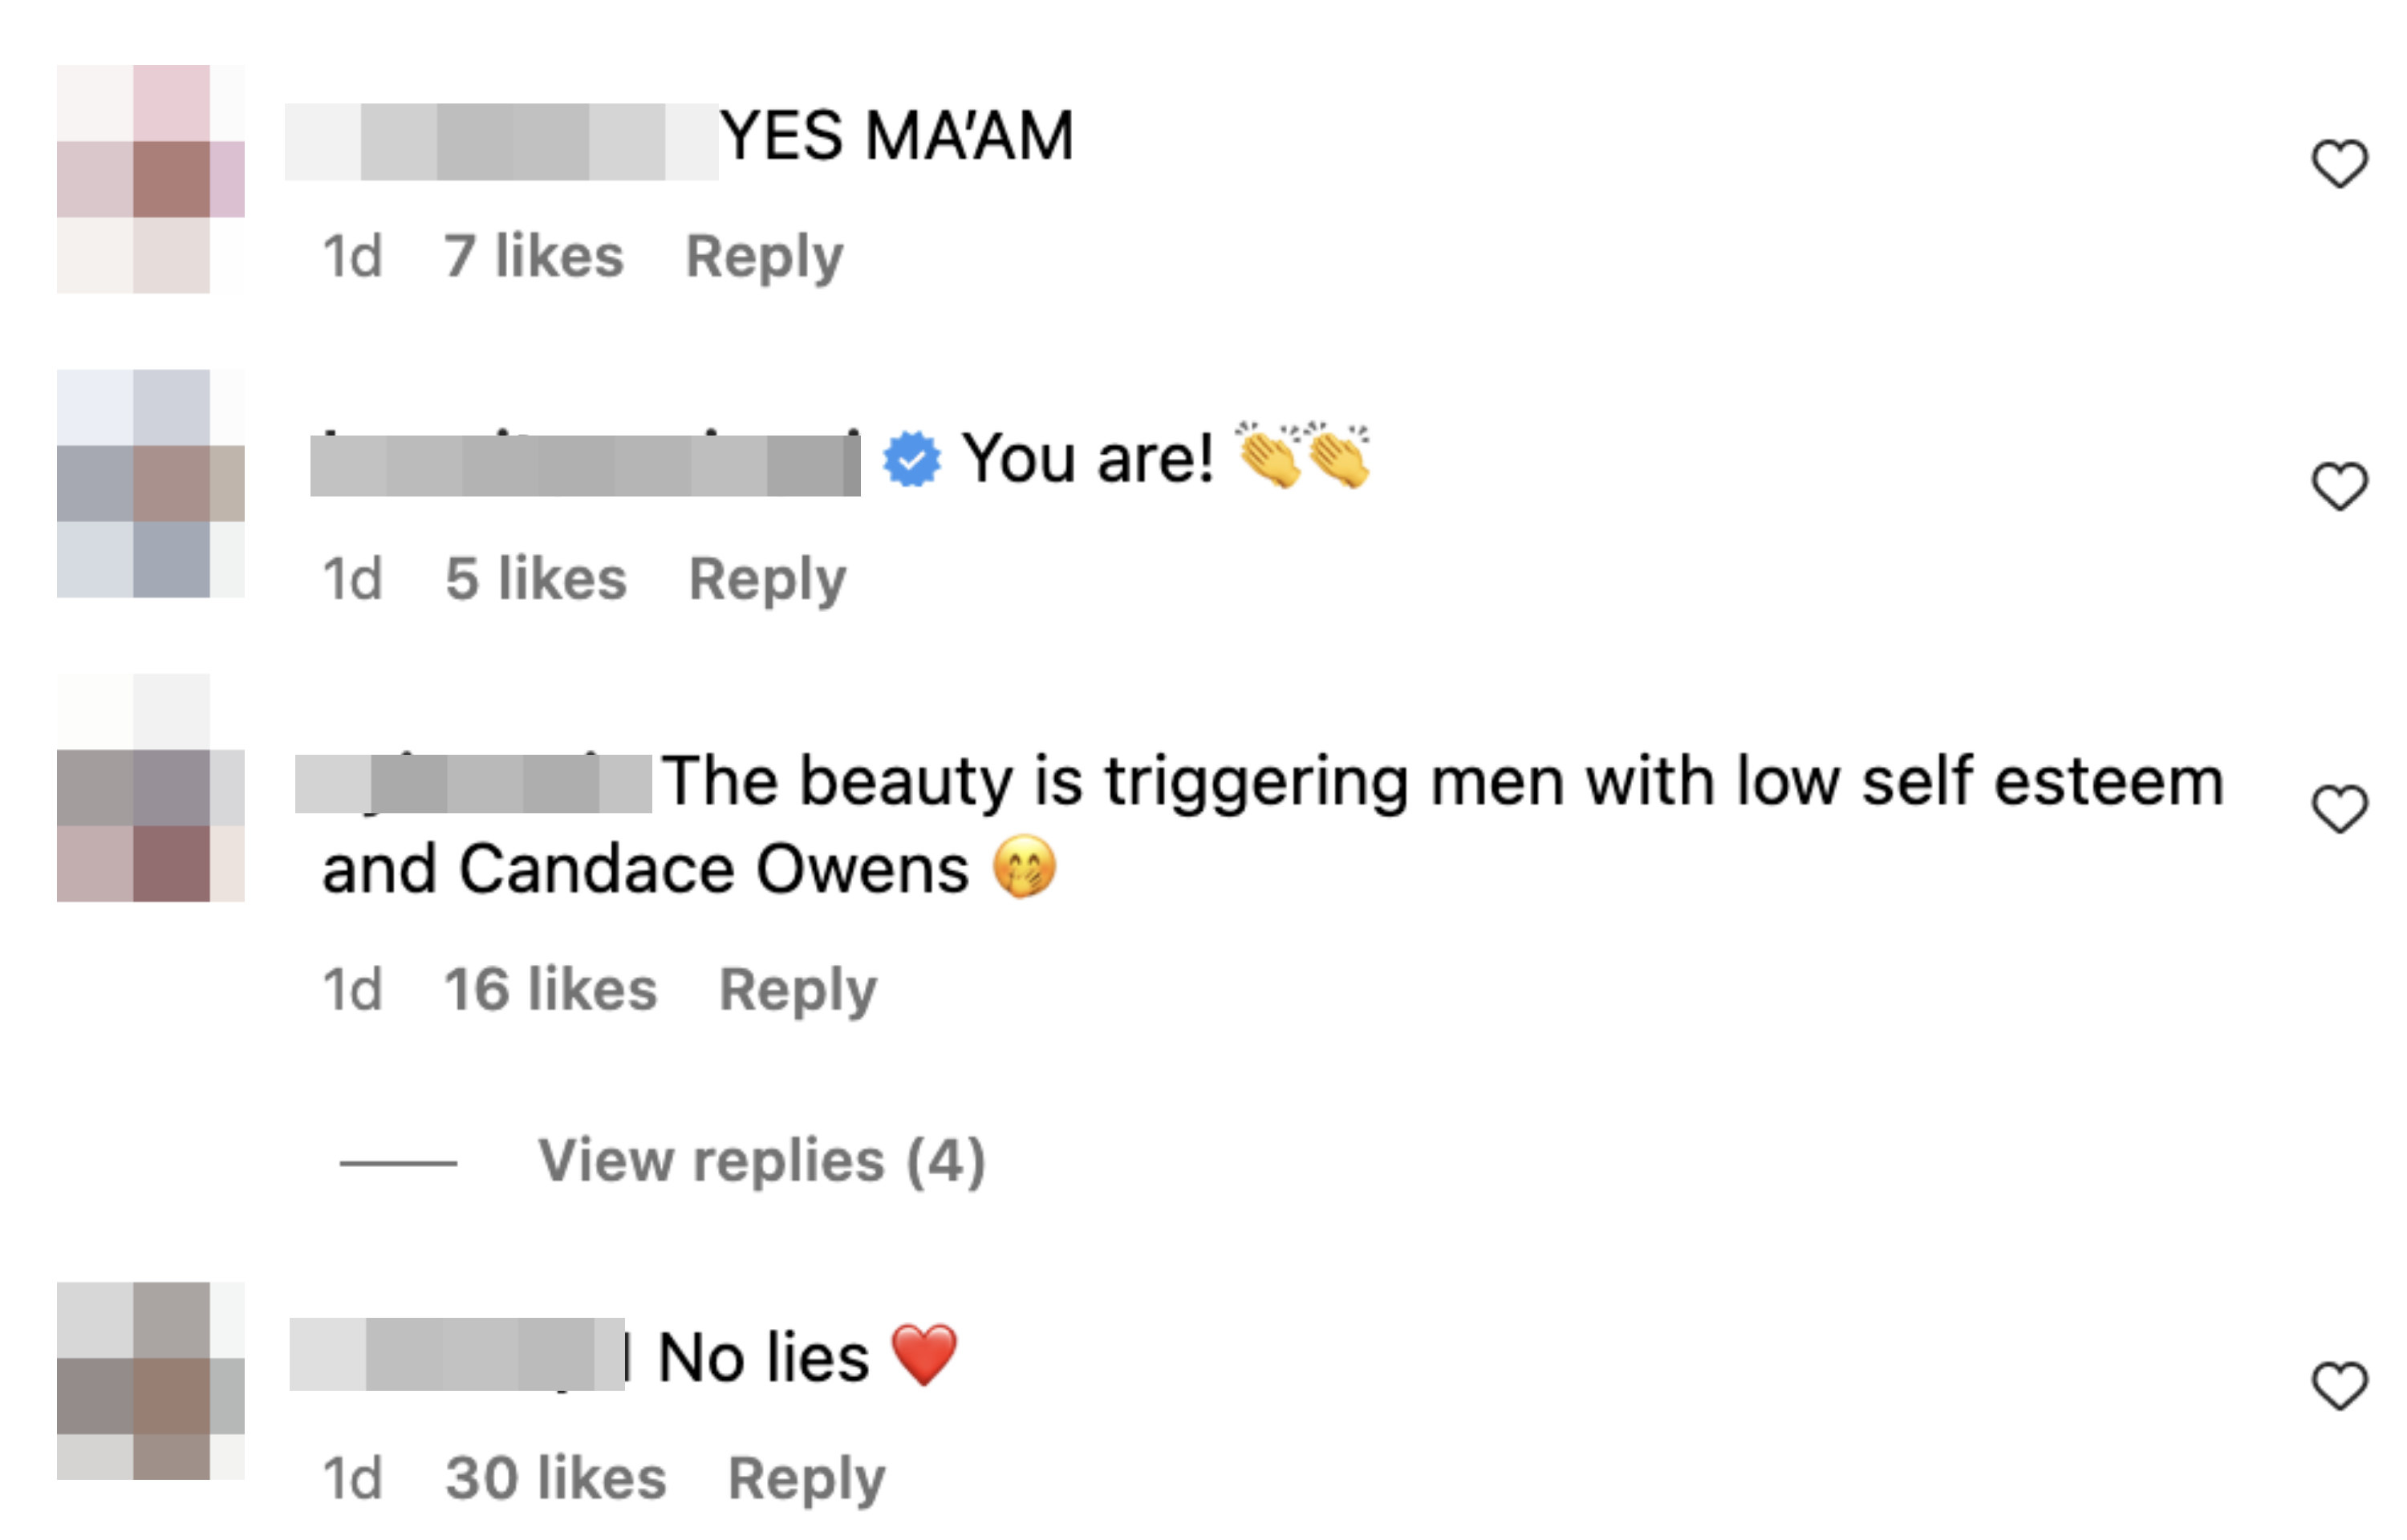 One person said &quot;The beauty is triggering men with low self esteem and Candace Owens